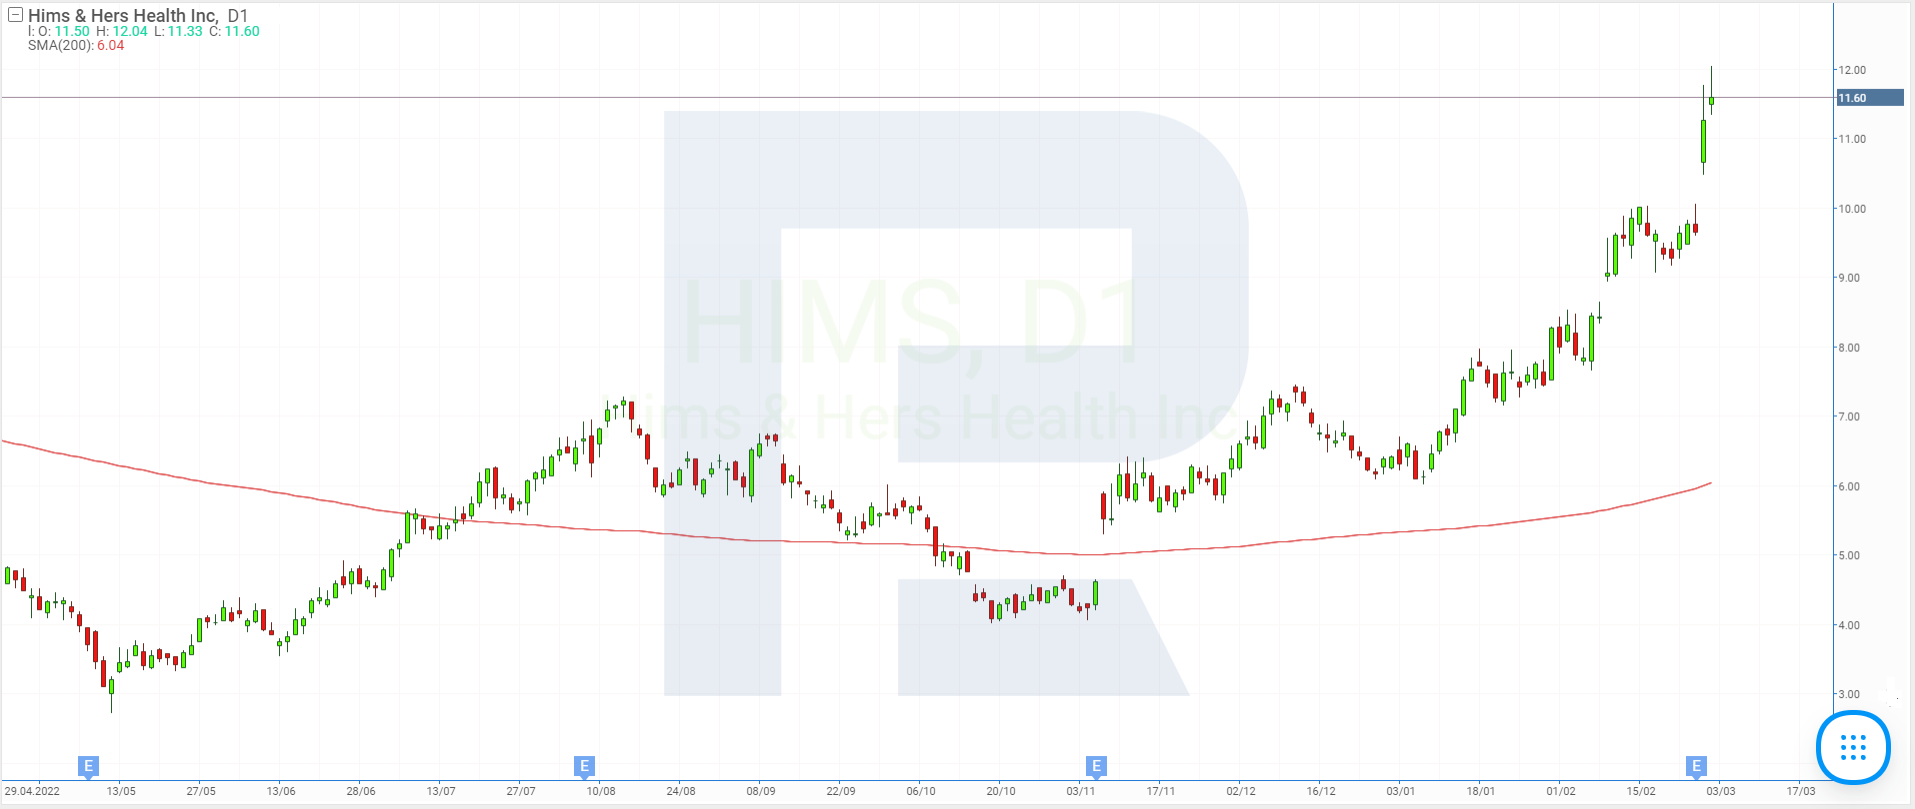 Stock price charts of Hims & Hers Health Inc.